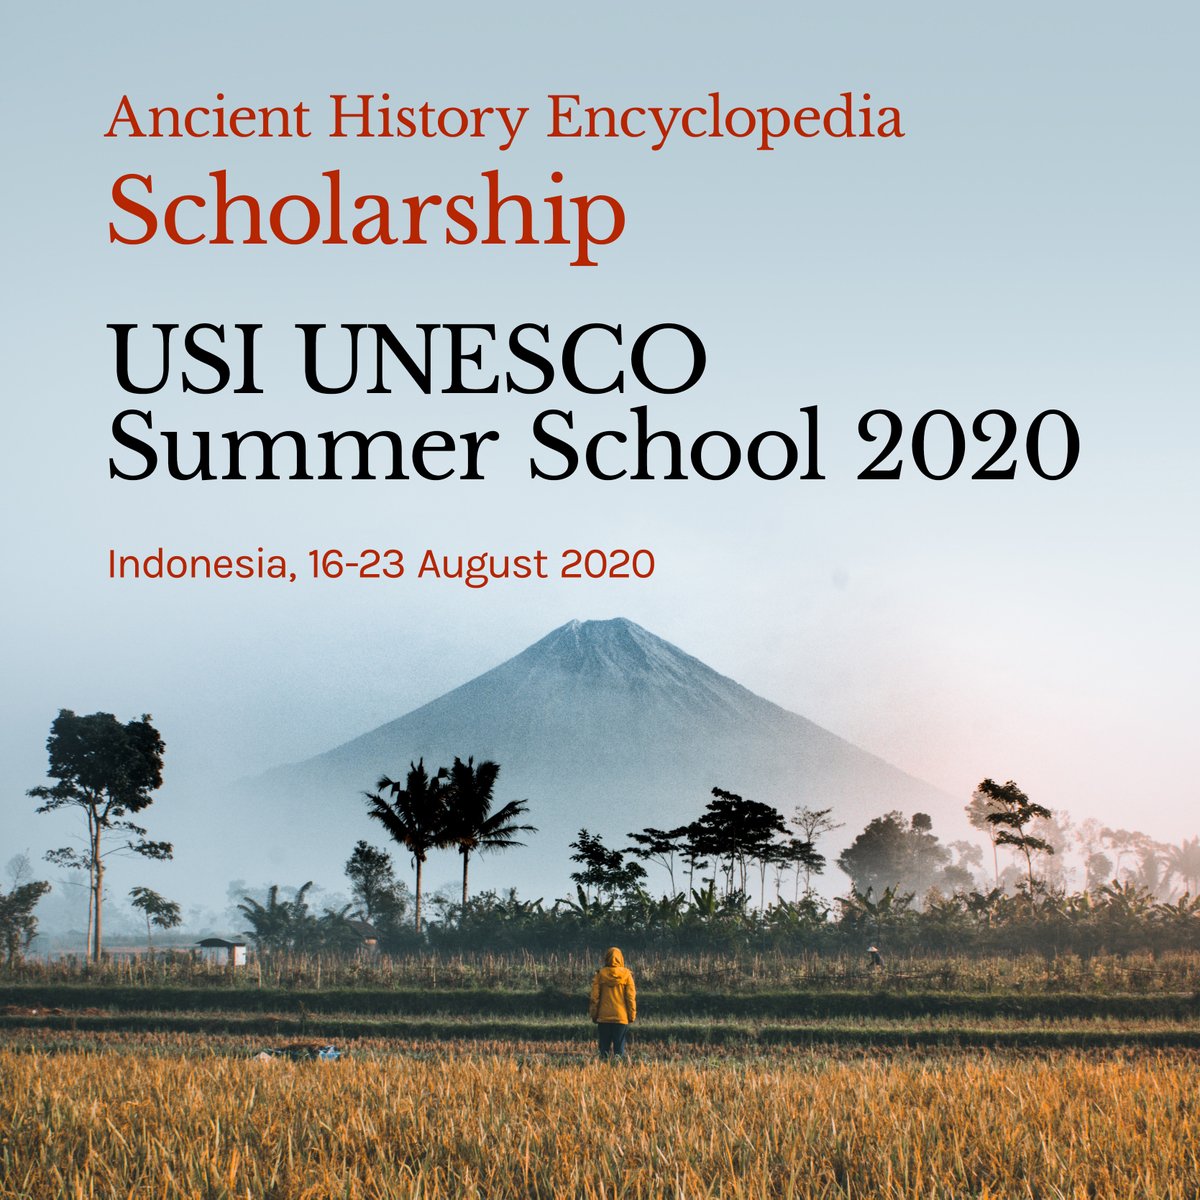 We're offering a scholarship to attend the Summer School 2020 of the UNESCO Chair in ICT to develop and promote sustainable tourism in World Heritage Sites. The event will take place in Indonesia from 16-23 August 2020. juno.ancient.eu/unesco-summer-… 

#Unite4Heritage #Faces4Heritage